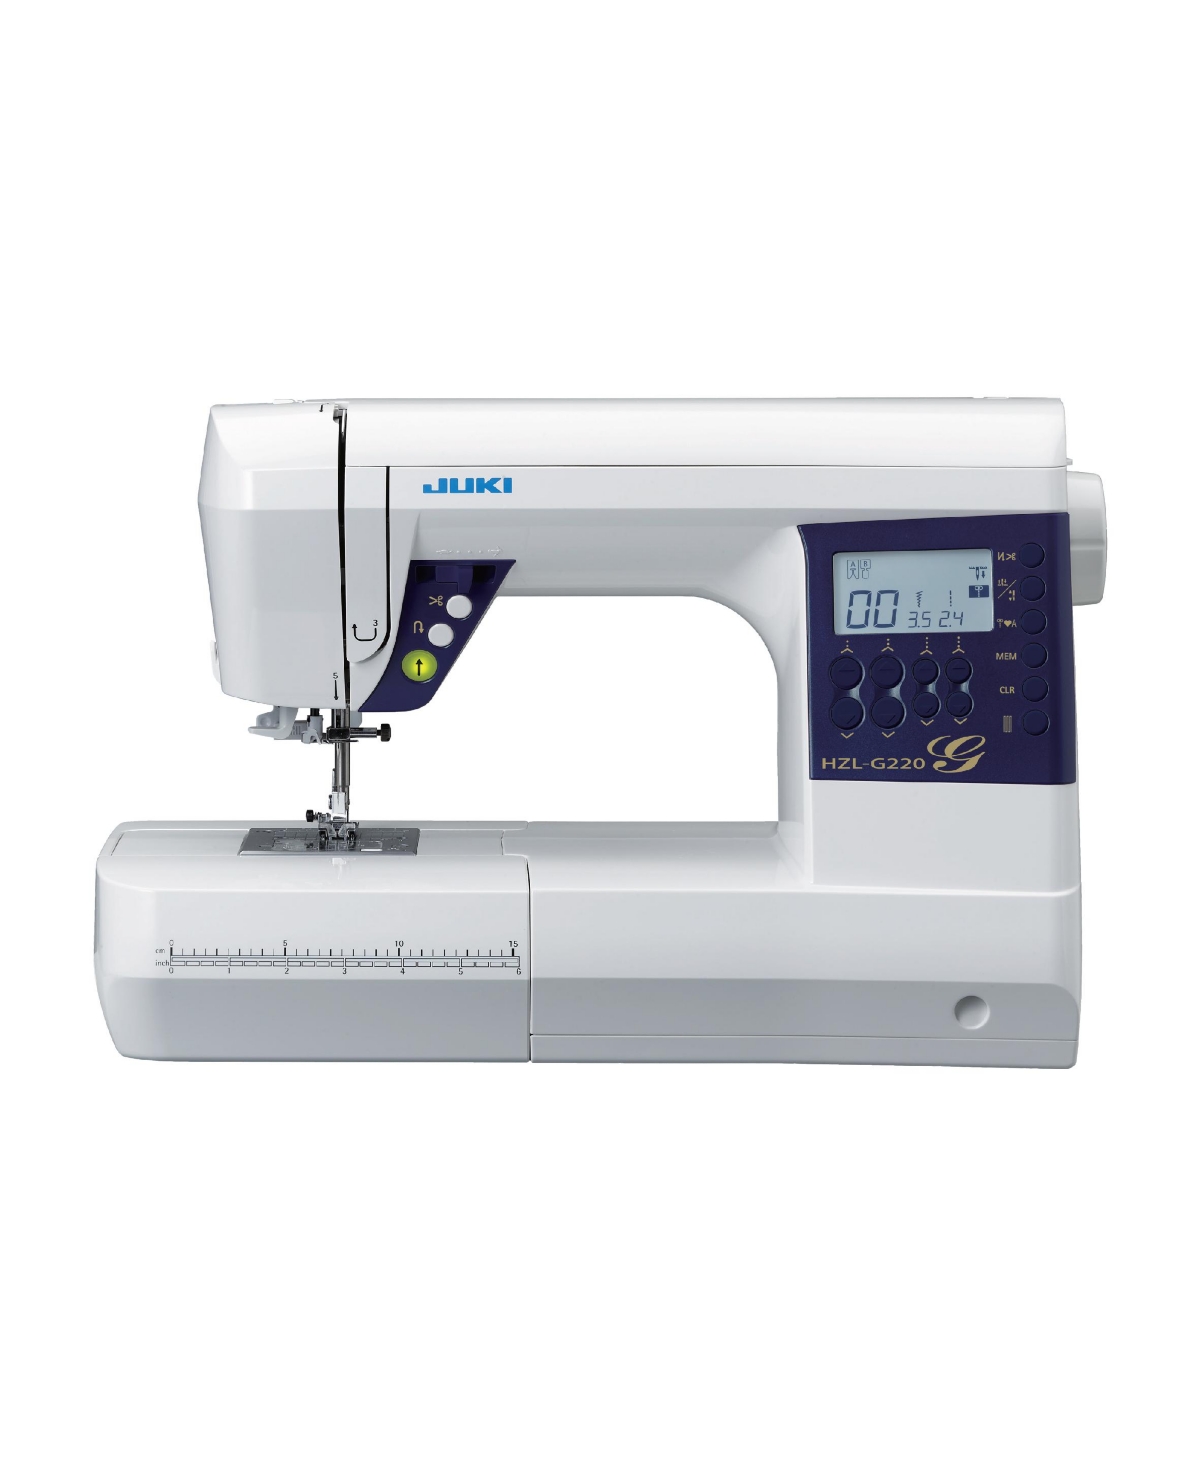 Hzl-G220 Computerized Sewing and Quilting Machine - White